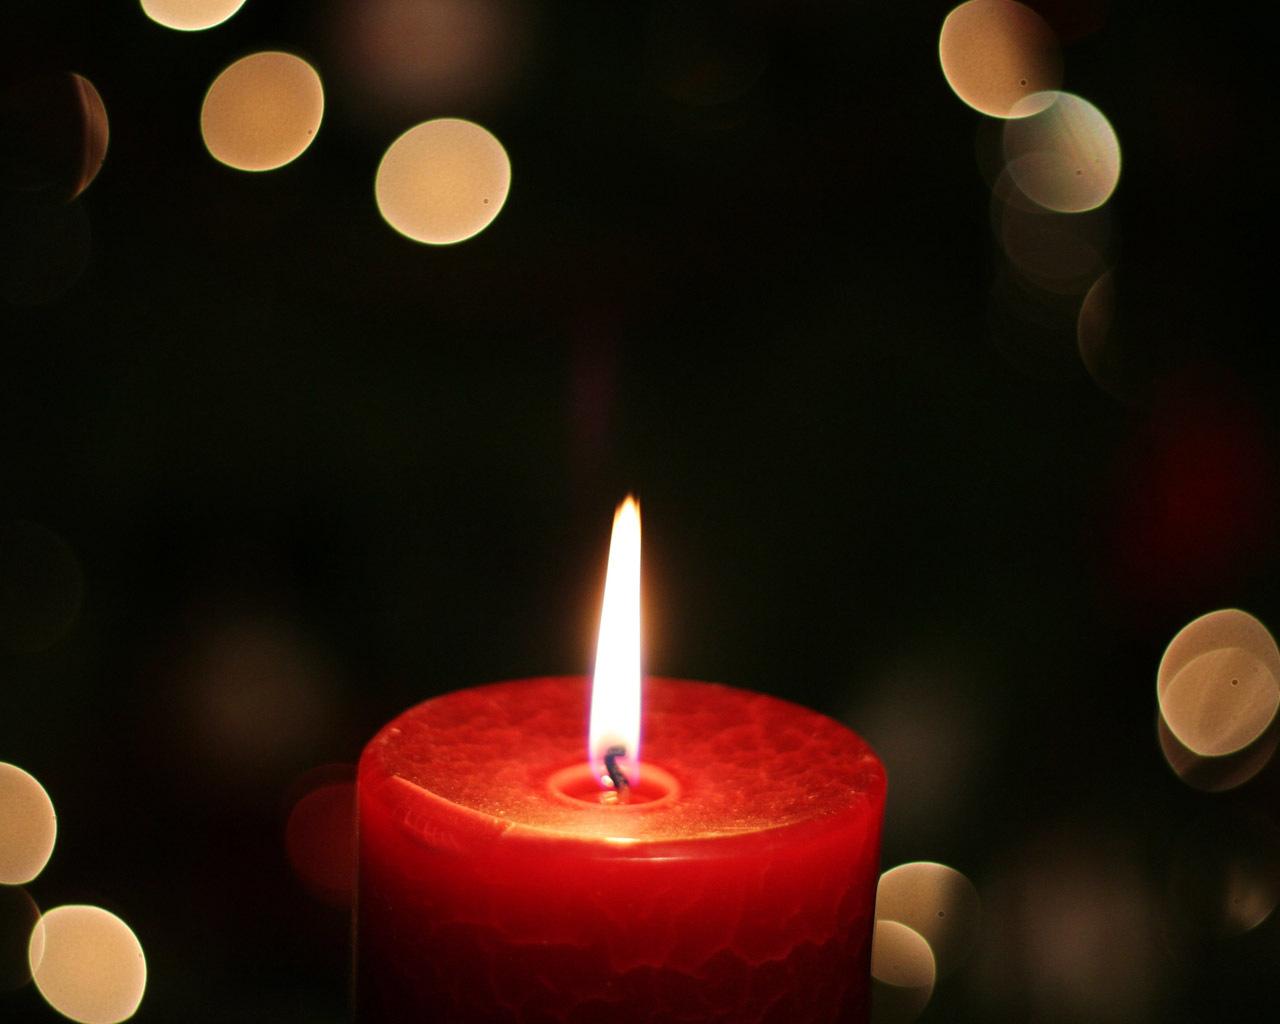 Simple Red Candle #Wallpaper